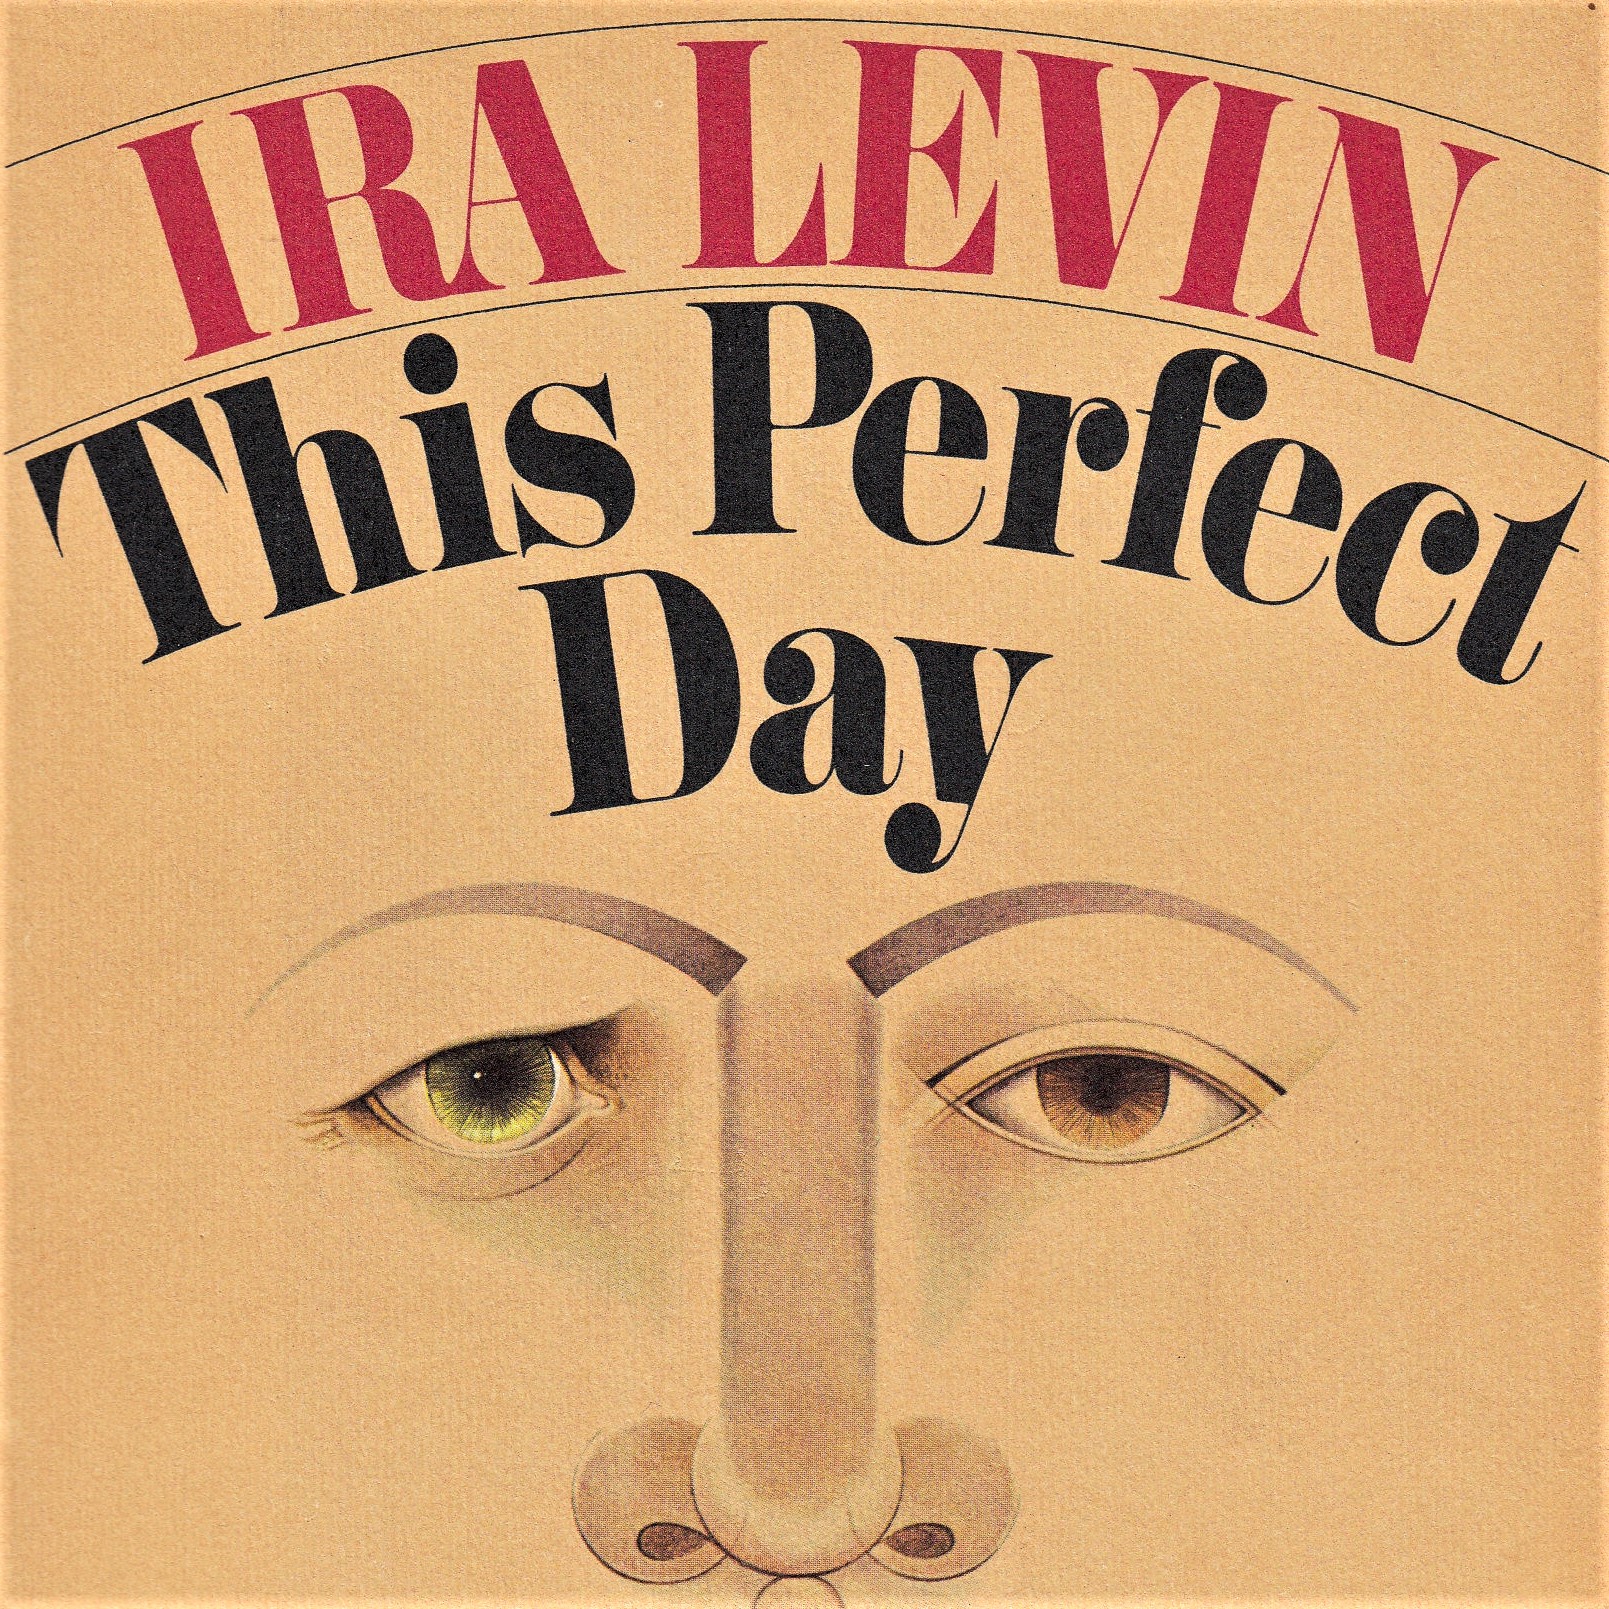 Cover image of Ira Levin's 'This Perfect Day'